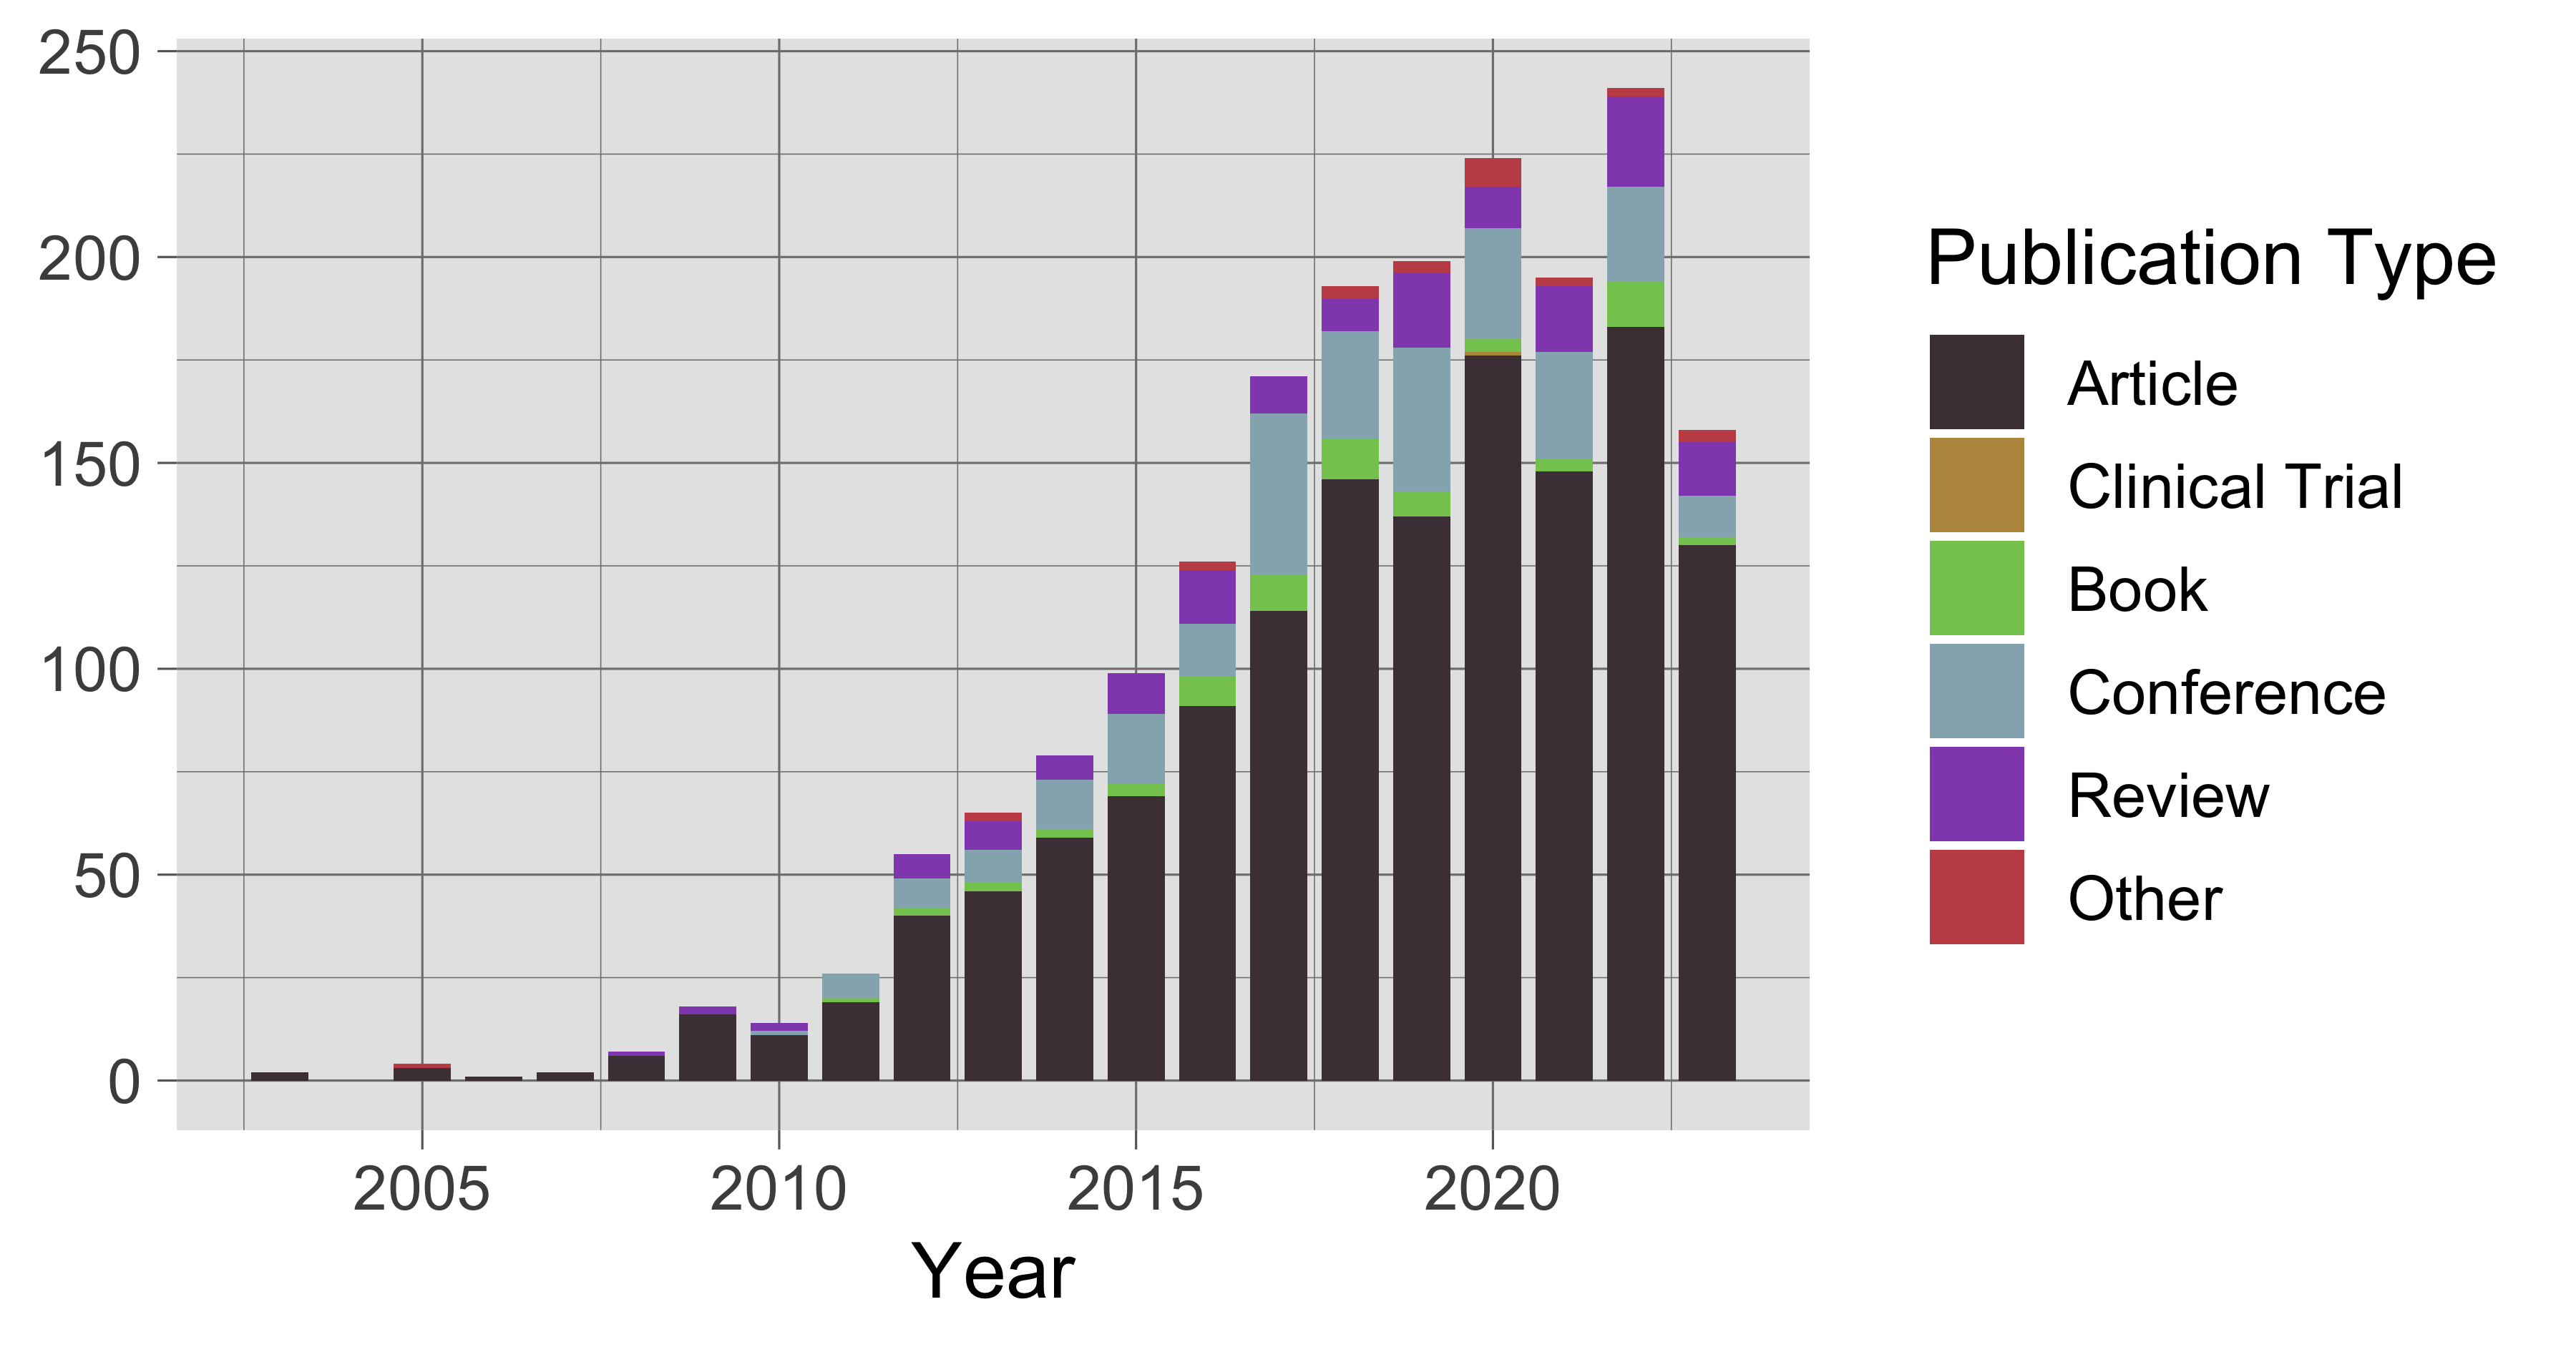 Publications citing the Disease Ontology by year